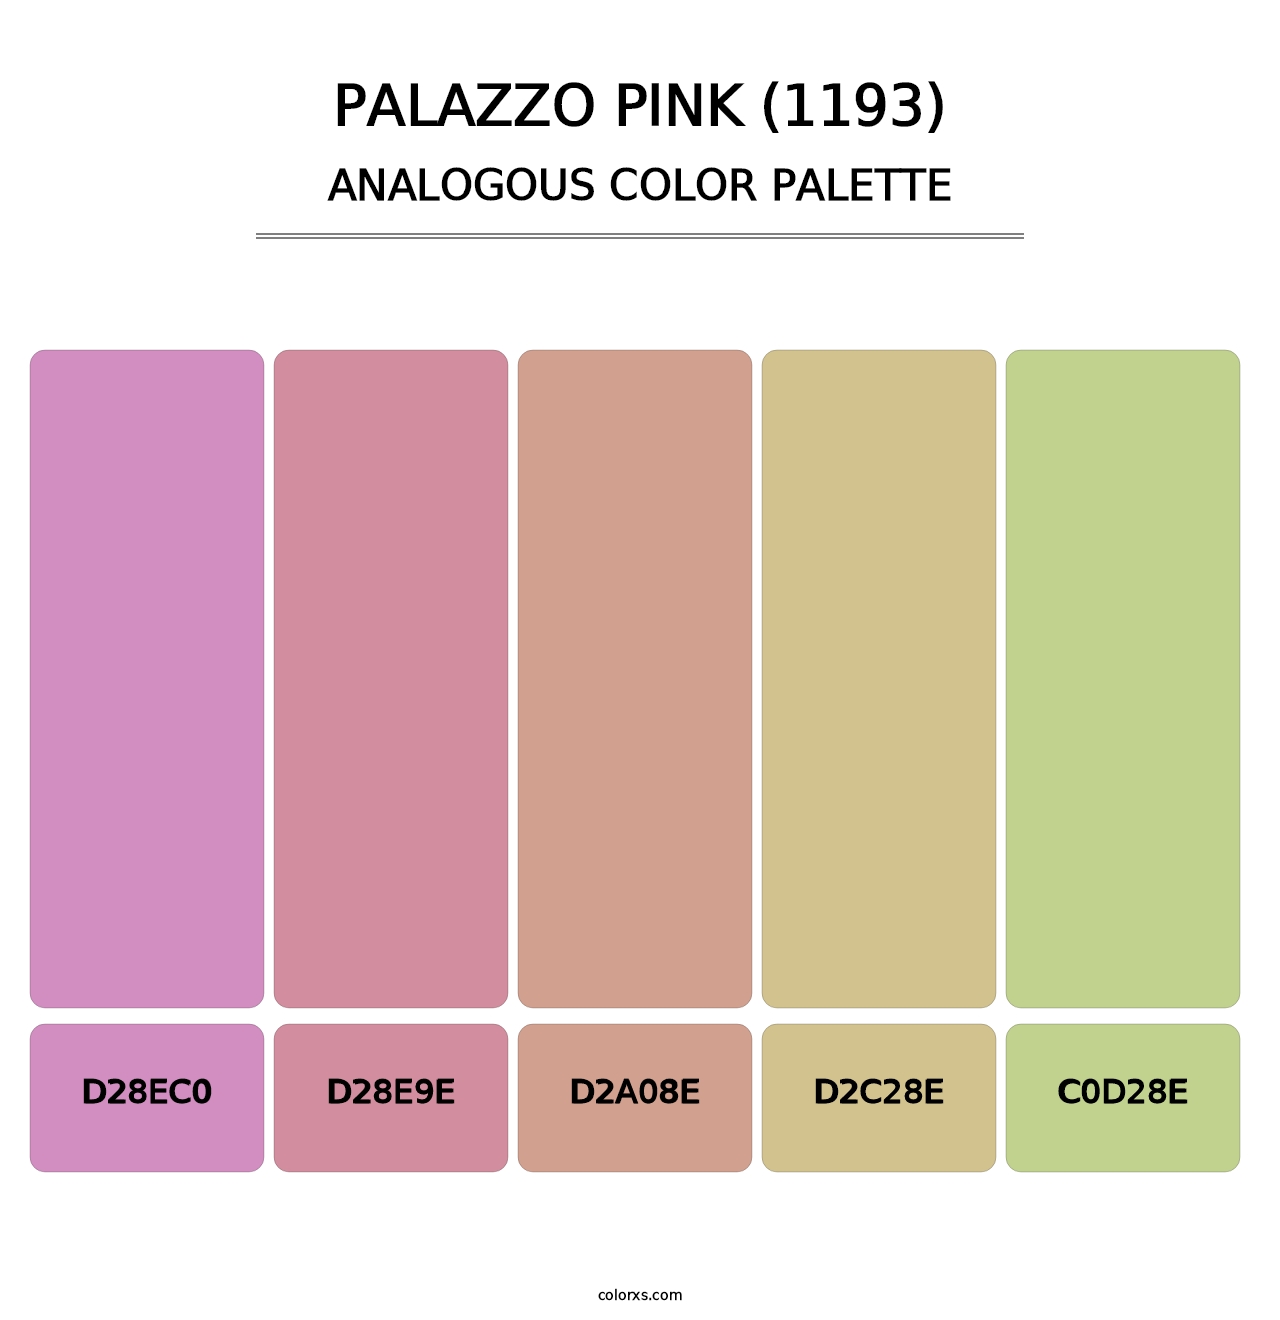 Palazzo Pink (1193) - Analogous Color Palette